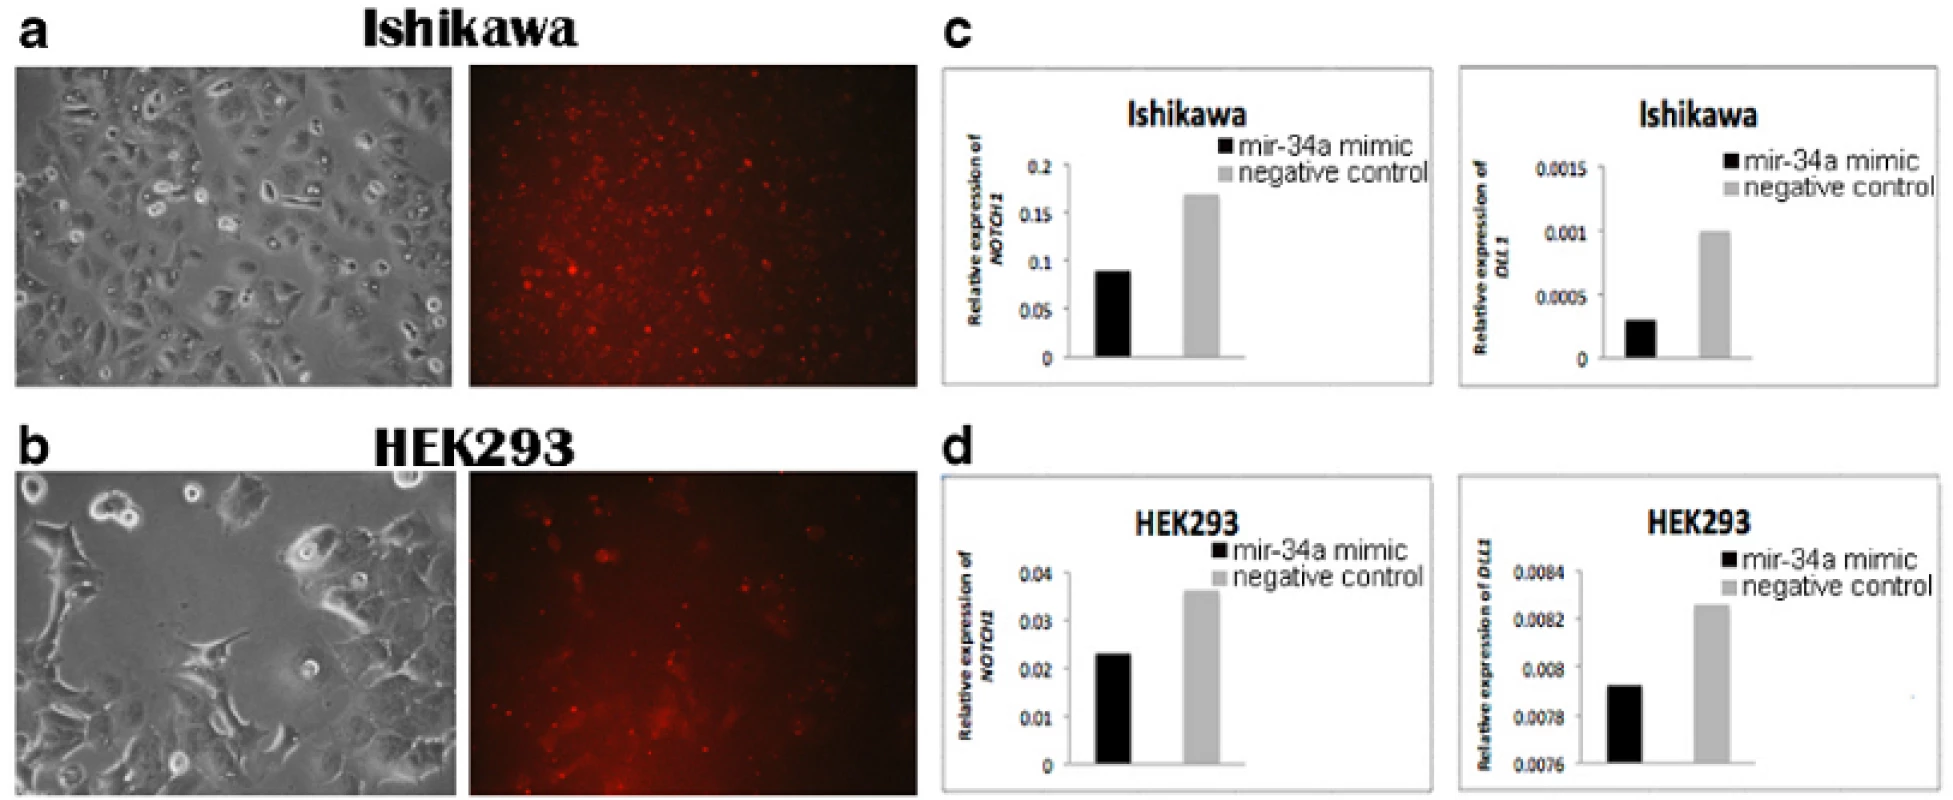 Detection of &lt;m&gt;NOTCH1&lt;/m&gt; and &lt;m&gt;DLL1&lt;/m&gt; expression in transfected Ishikawa and HEK293 cell lines. BLOCK-iT Alexa Fluor red fluorescent and mir-34a mimic transfection in (&lt;b&gt;a&lt;/b&gt;) Ishikawa cells and (&lt;b&gt;b&lt;/b&gt;) HEK293 cells. The photos were taken 24 h after transfection corresponding to morphology of cells (left) and BLOCK-iT Alexa Fluor red fluorescent (right). &lt;b&gt;c&lt;/b&gt; The level of &lt;m&gt;NOTCH1&lt;/m&gt; and &lt;m&gt;DLL1&lt;/m&gt; expression in Ishikawa cells 48 h after transfection with mir-34a mimic compared with the negative control. &lt;b&gt;d&lt;/b&gt; The level of &lt;m&gt;NOTCH1&lt;/m&gt; and &lt;m&gt;DLL1&lt;/m&gt; expression in HEK293 cells 48 h after transfection with mir-34a mimic compared with the negative control